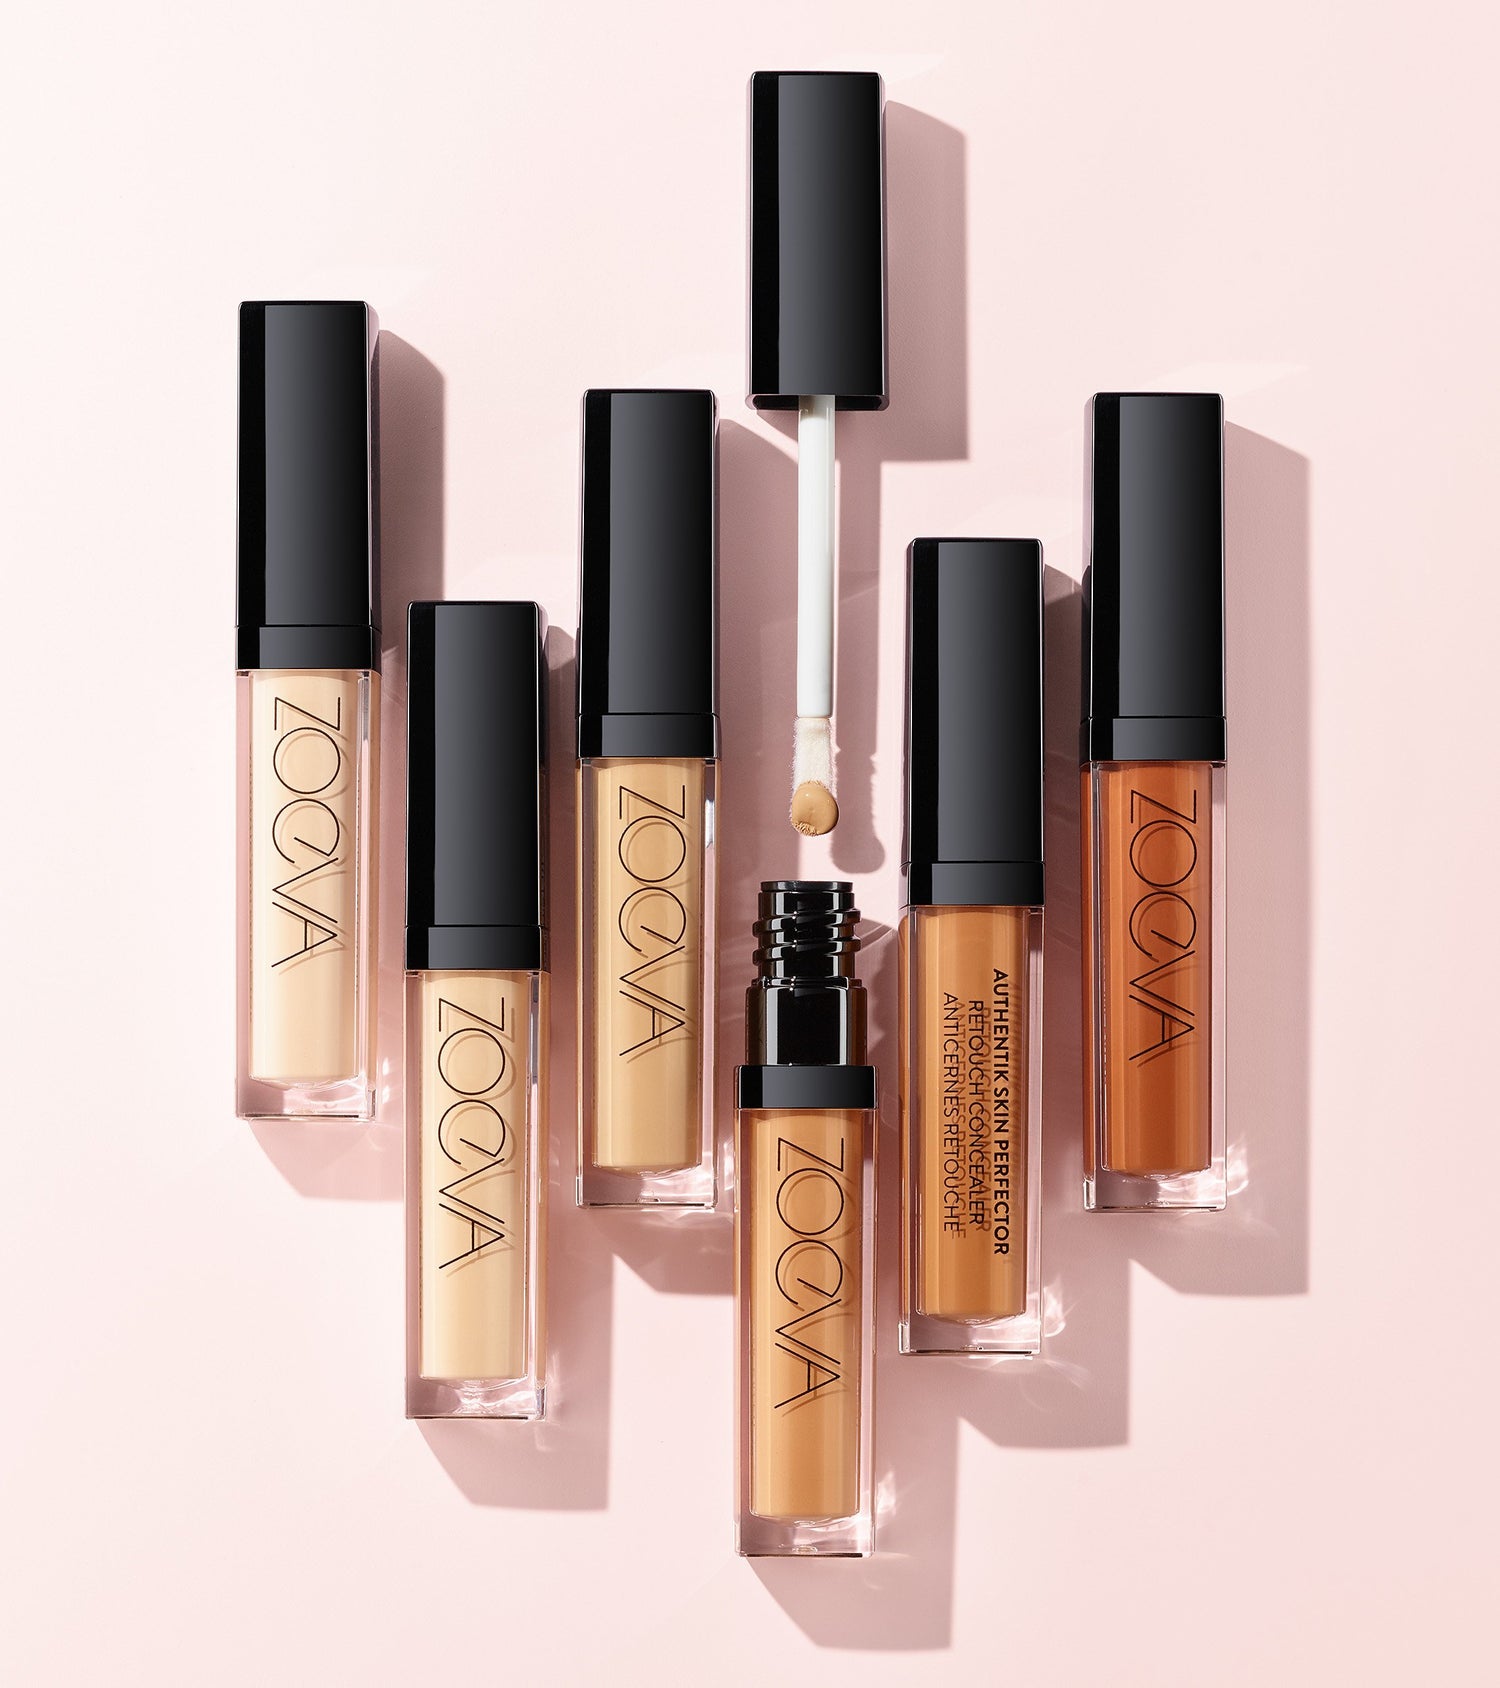 AUTHENTIK SKIN PERFECTOR CONCEALER (060 CREDIBLE) Main Image featured